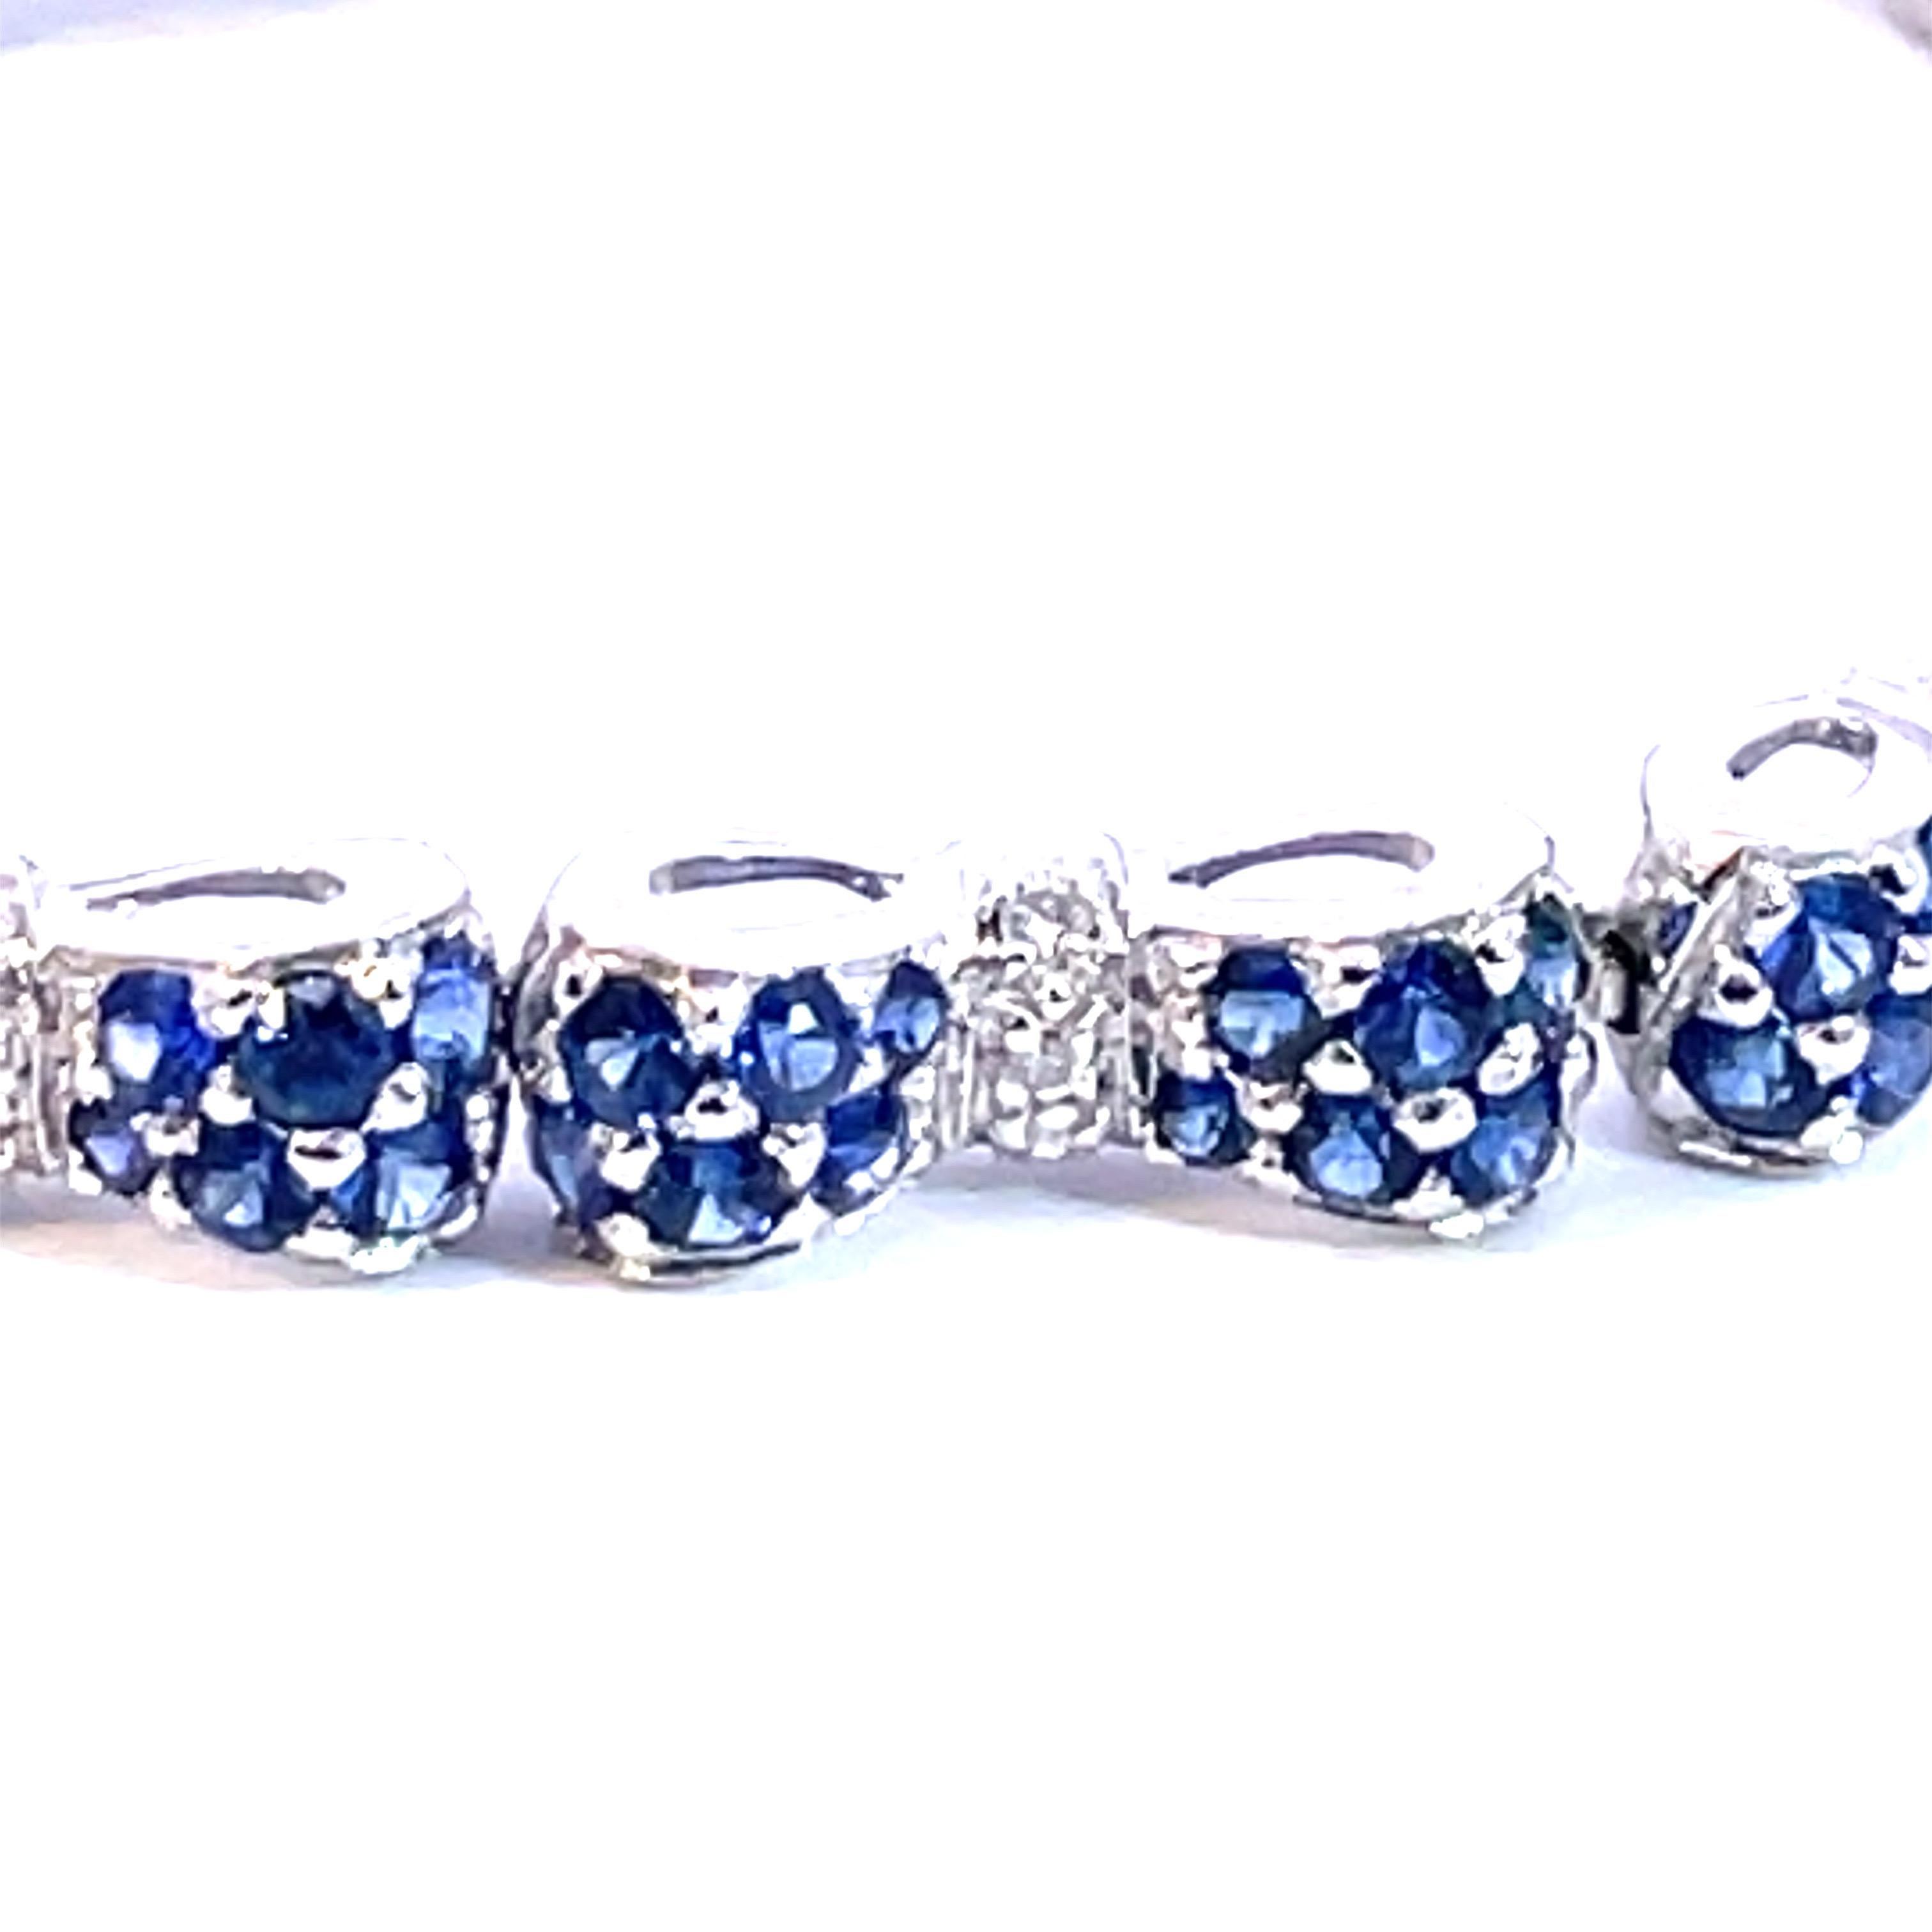 An Beautiful Bow Tie Bracelet set with natural blue sapphires and natural white diamonds in 18kt white gold.

144 natural  blue sapphires weighing 6.00ct total weight

36 natural white diamonds weighing 0.30ct total weight

18kt white gold, 18